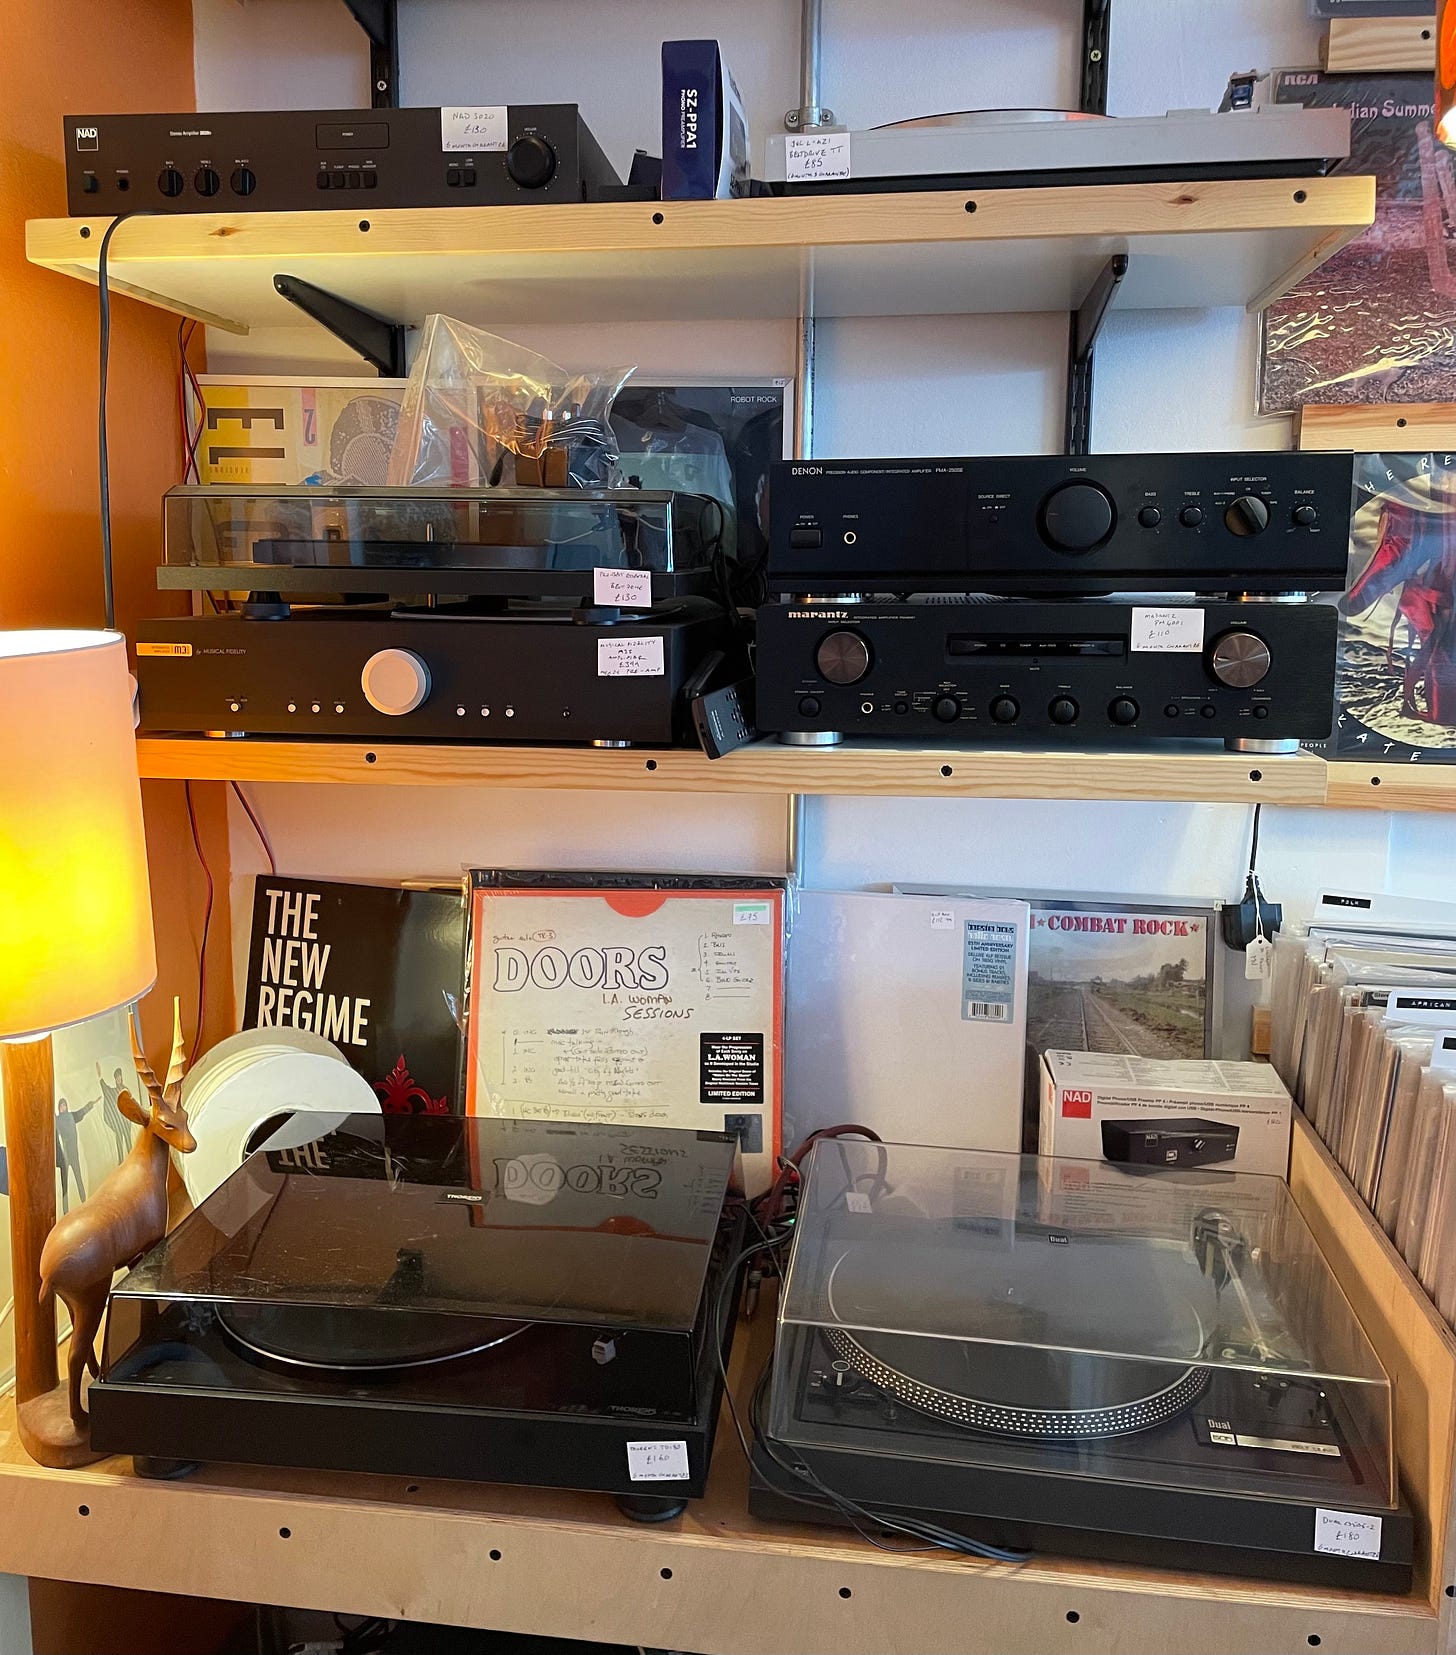 Freshly repaired and serviced turntables and hi-fi available in store, most priced around the £100-£150 mark